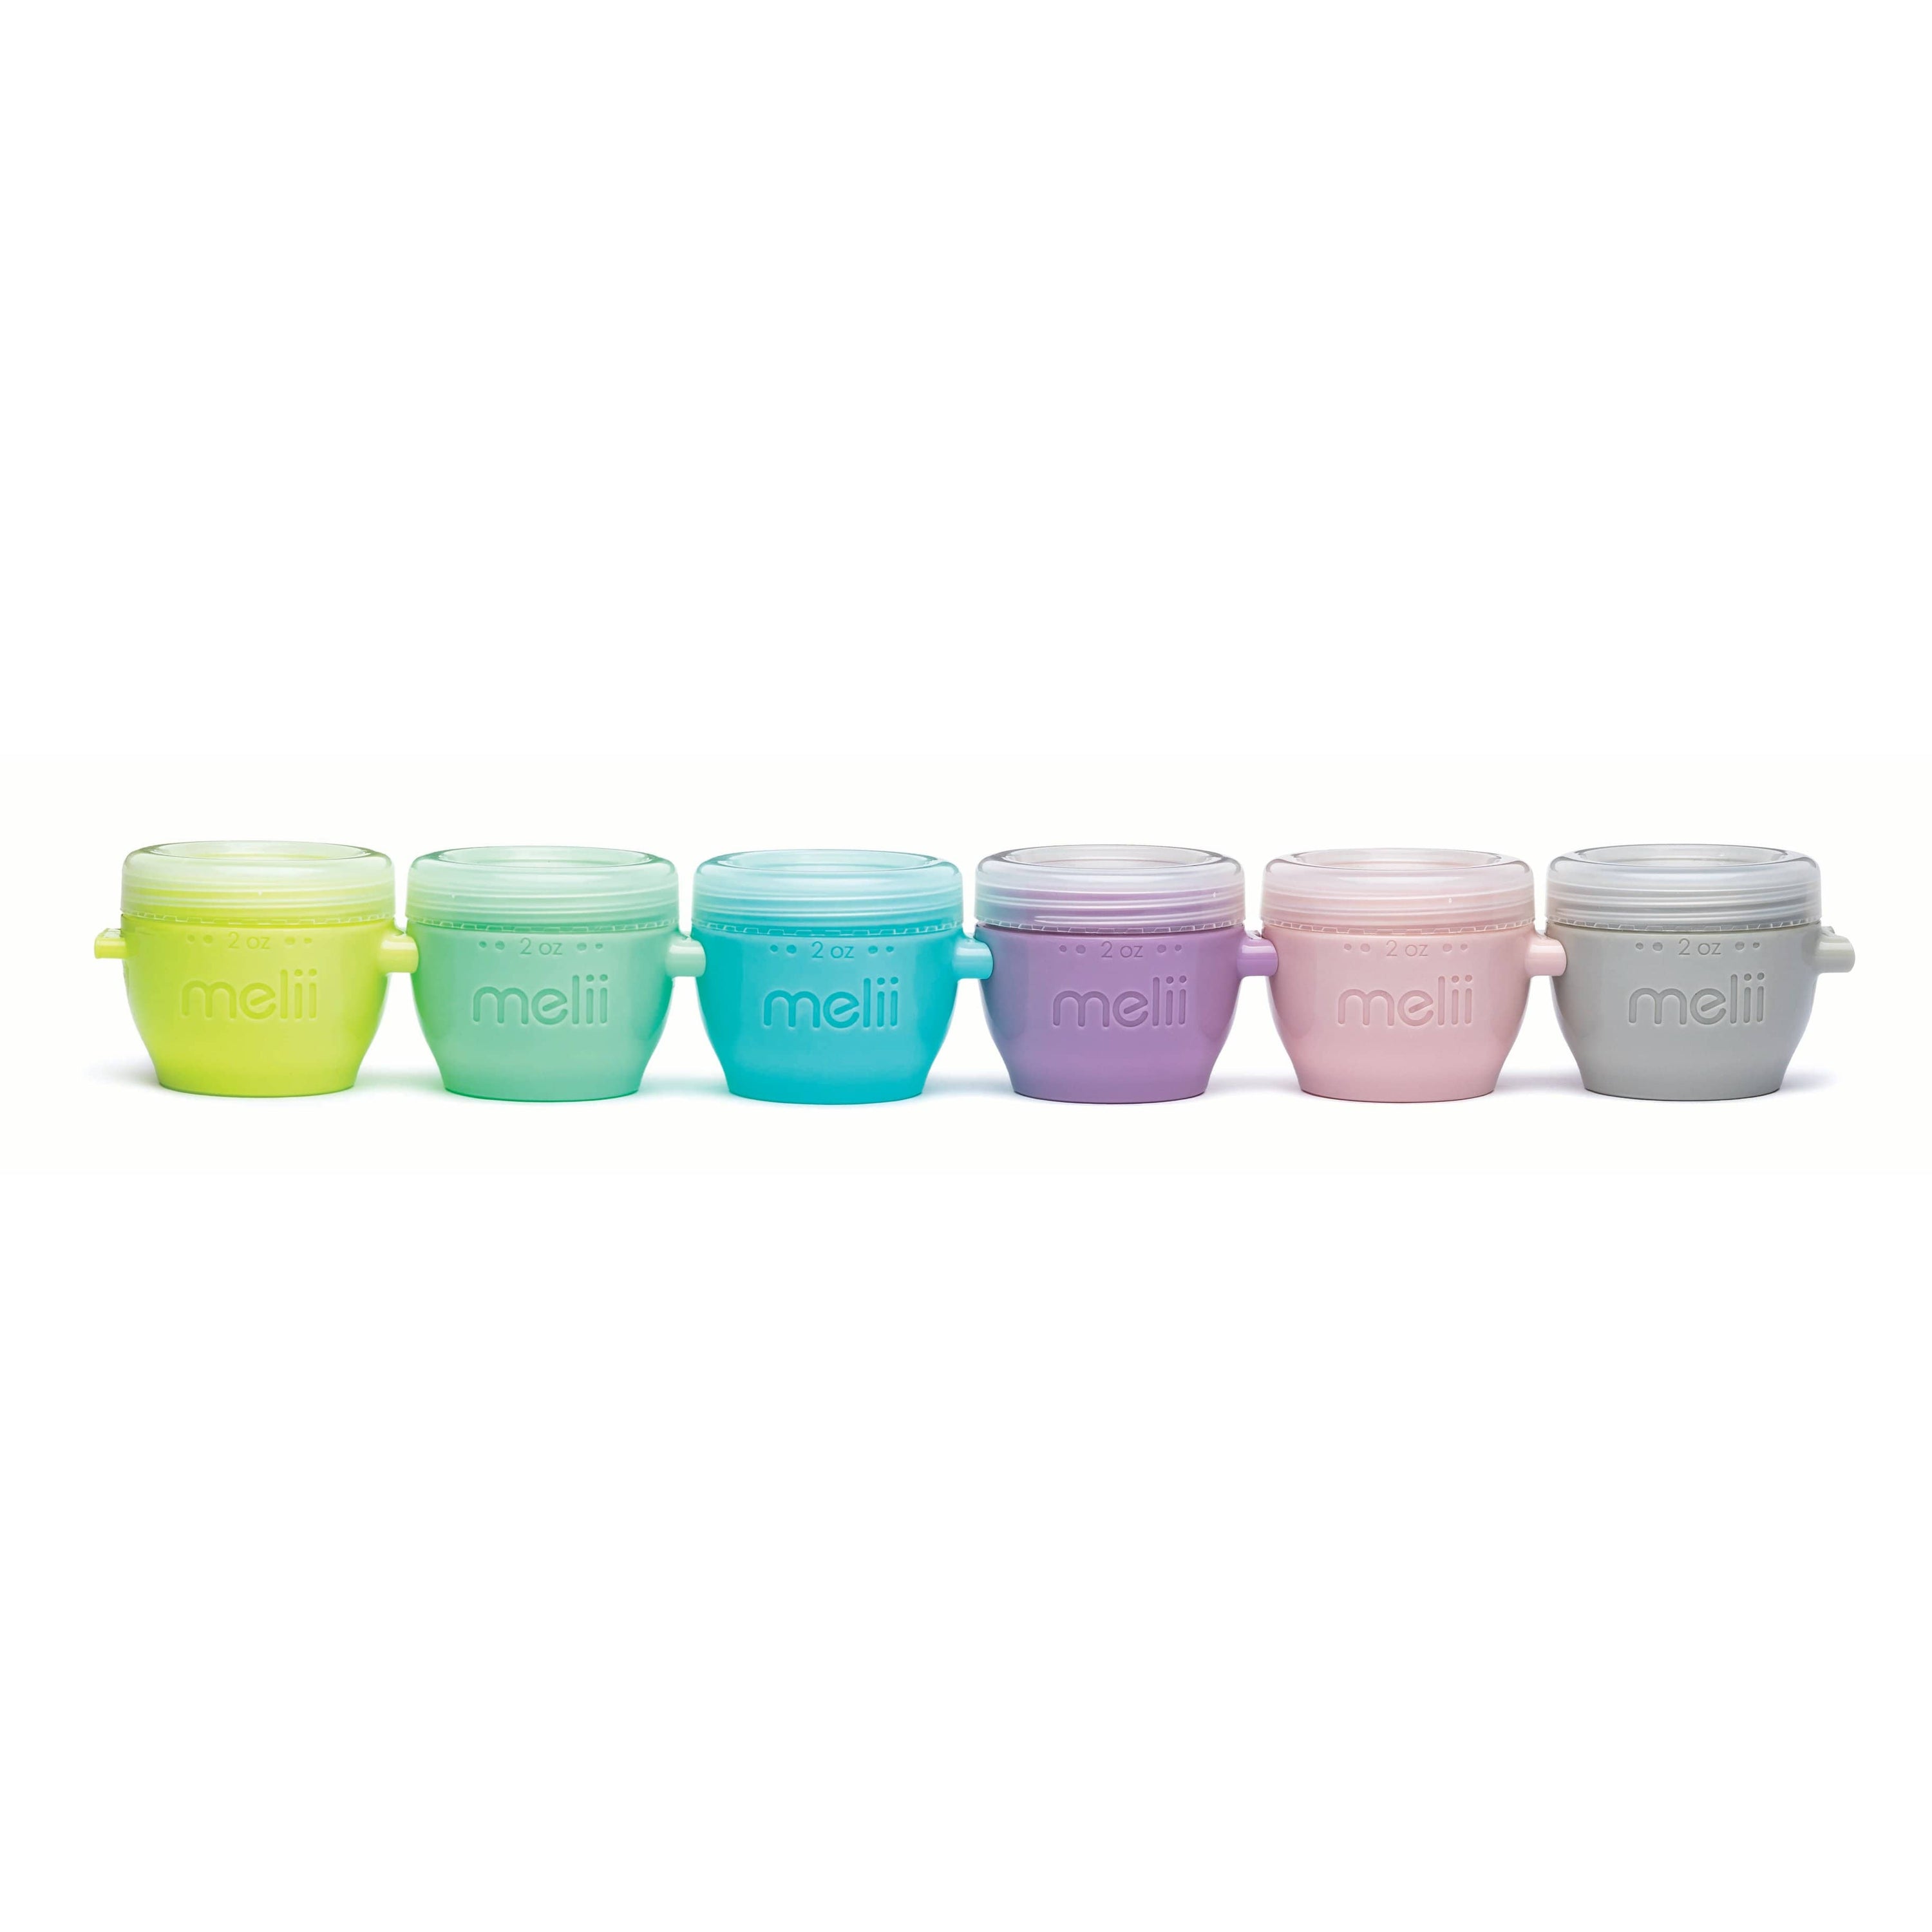 https://www.liltulips.com/cdn/shop/products/2oz-snap-go-pods-6-freezer-snack-containers-melii-lil-tulips-28193855570038.jpg?v=1633503251&width=3000